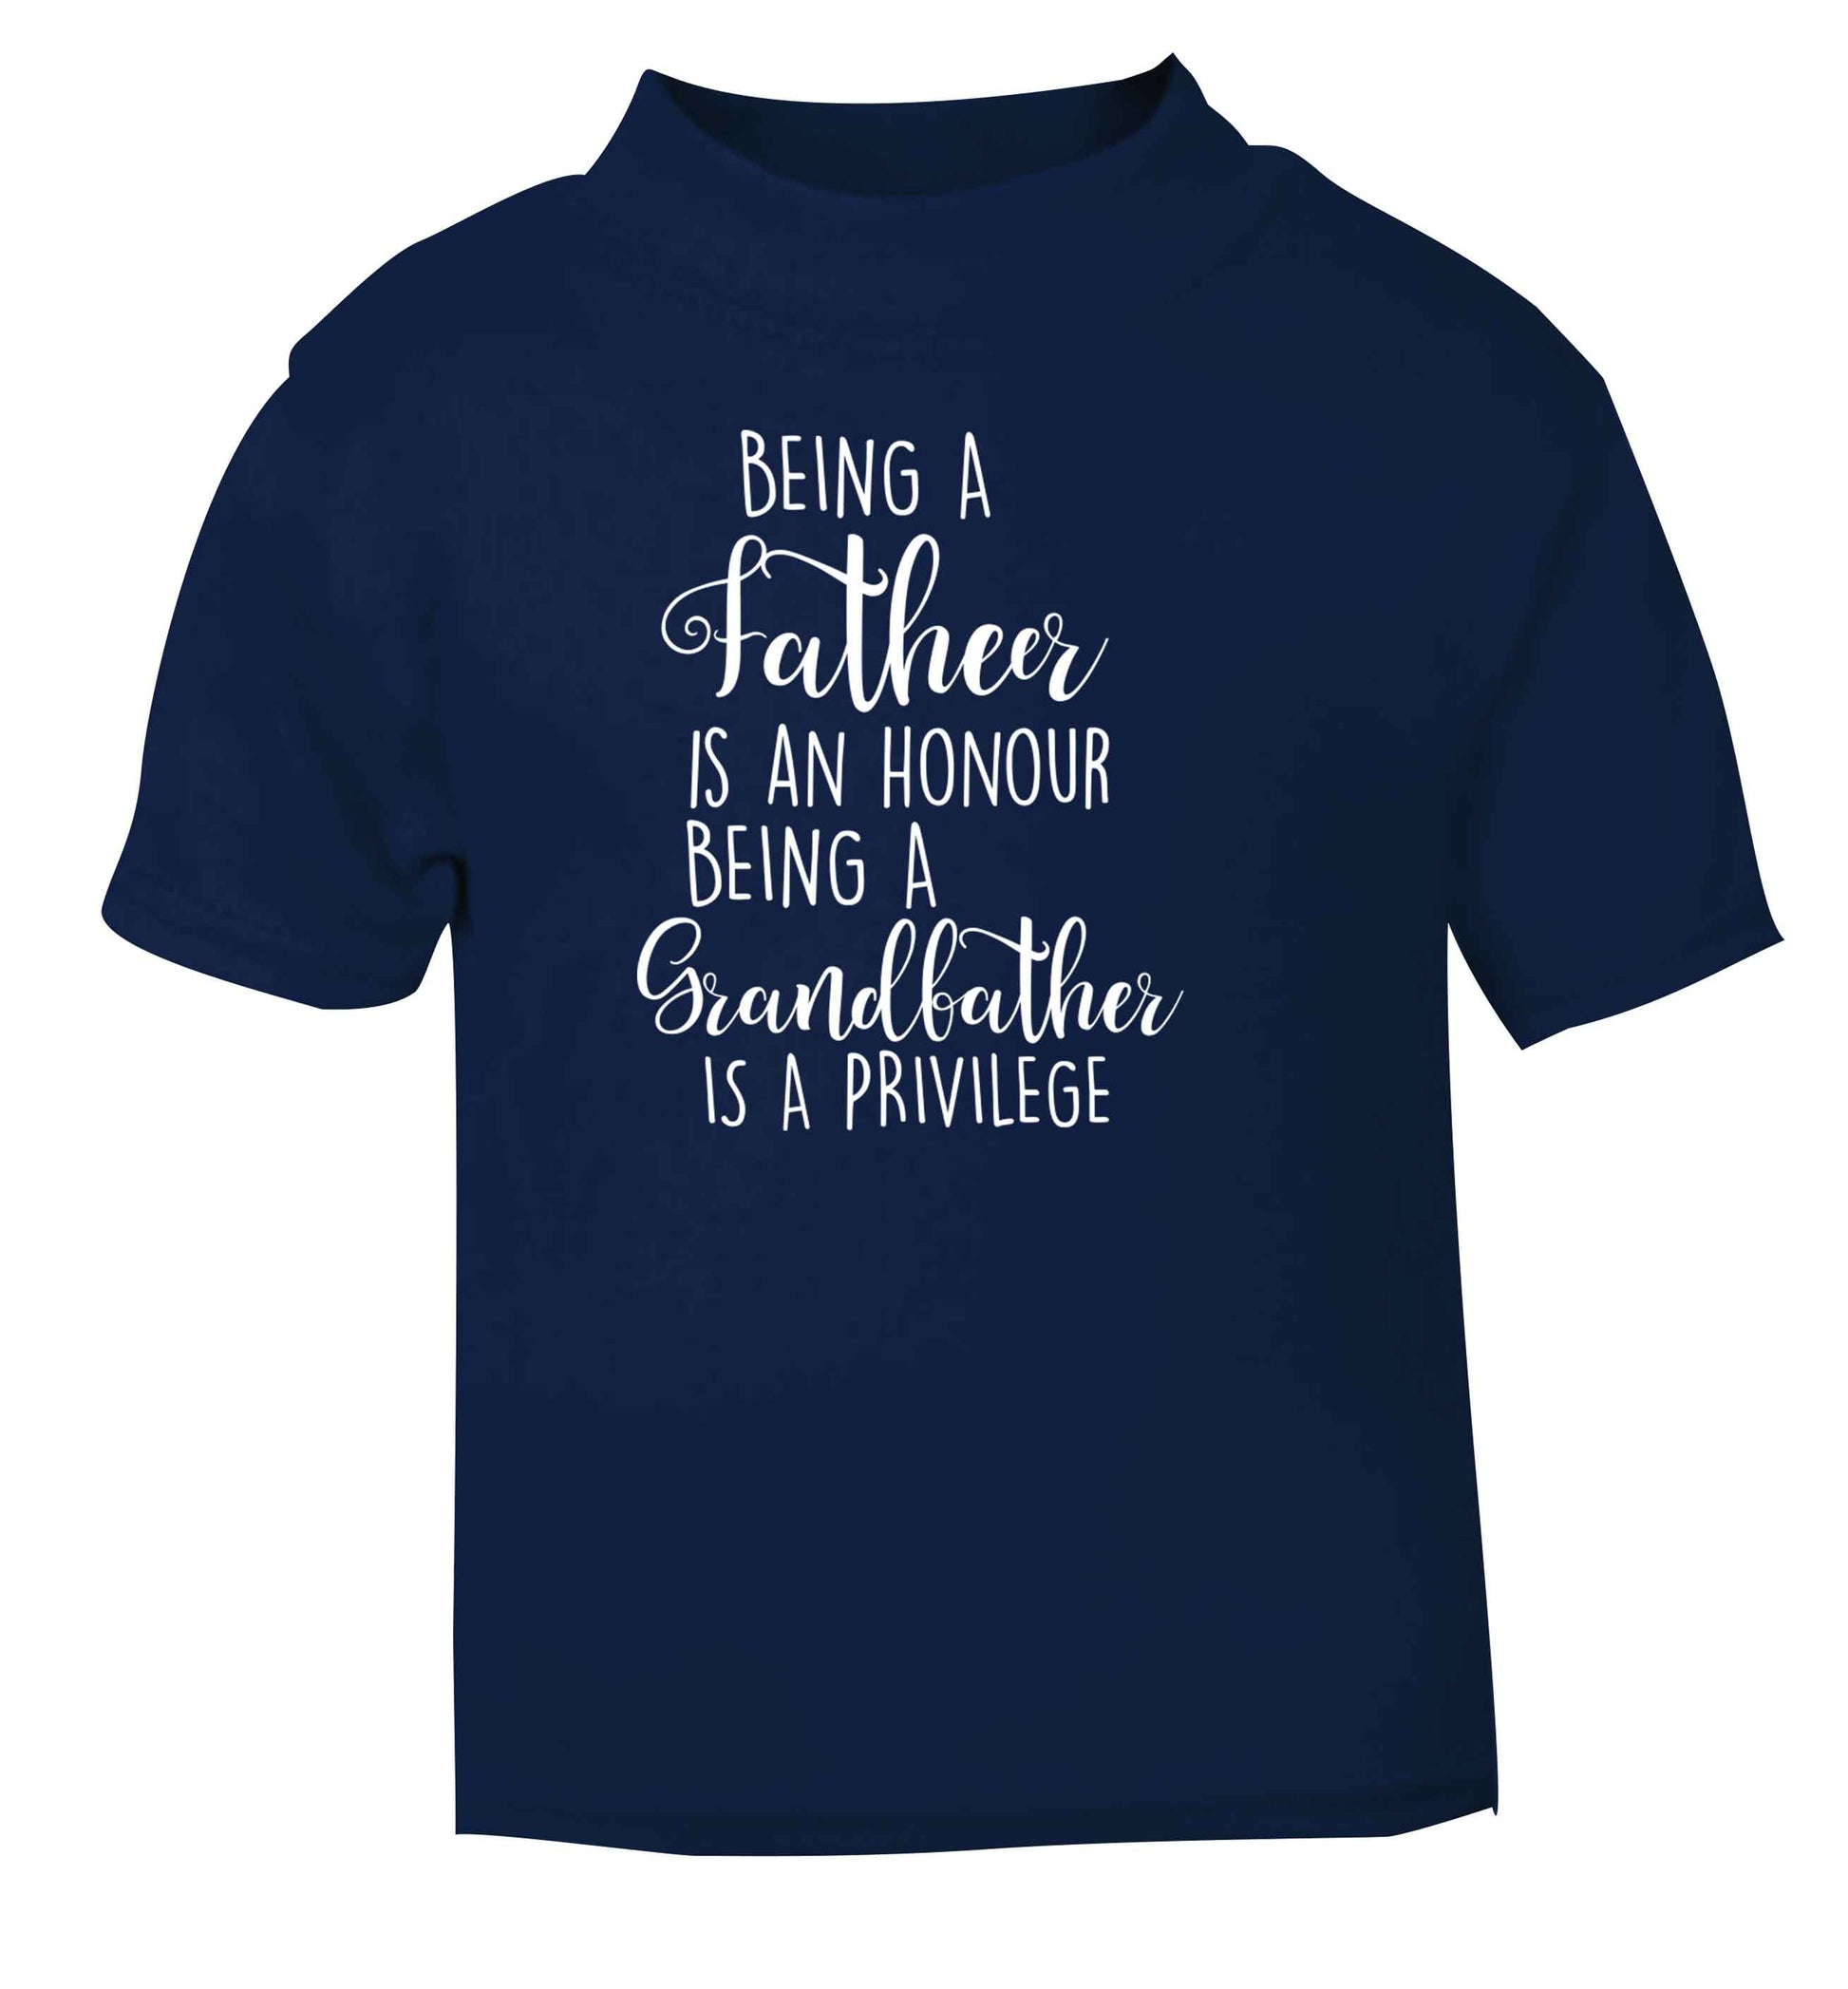 Being a father is an honour being a grandfather is a privilege navy Baby Toddler Tshirt 2 Years